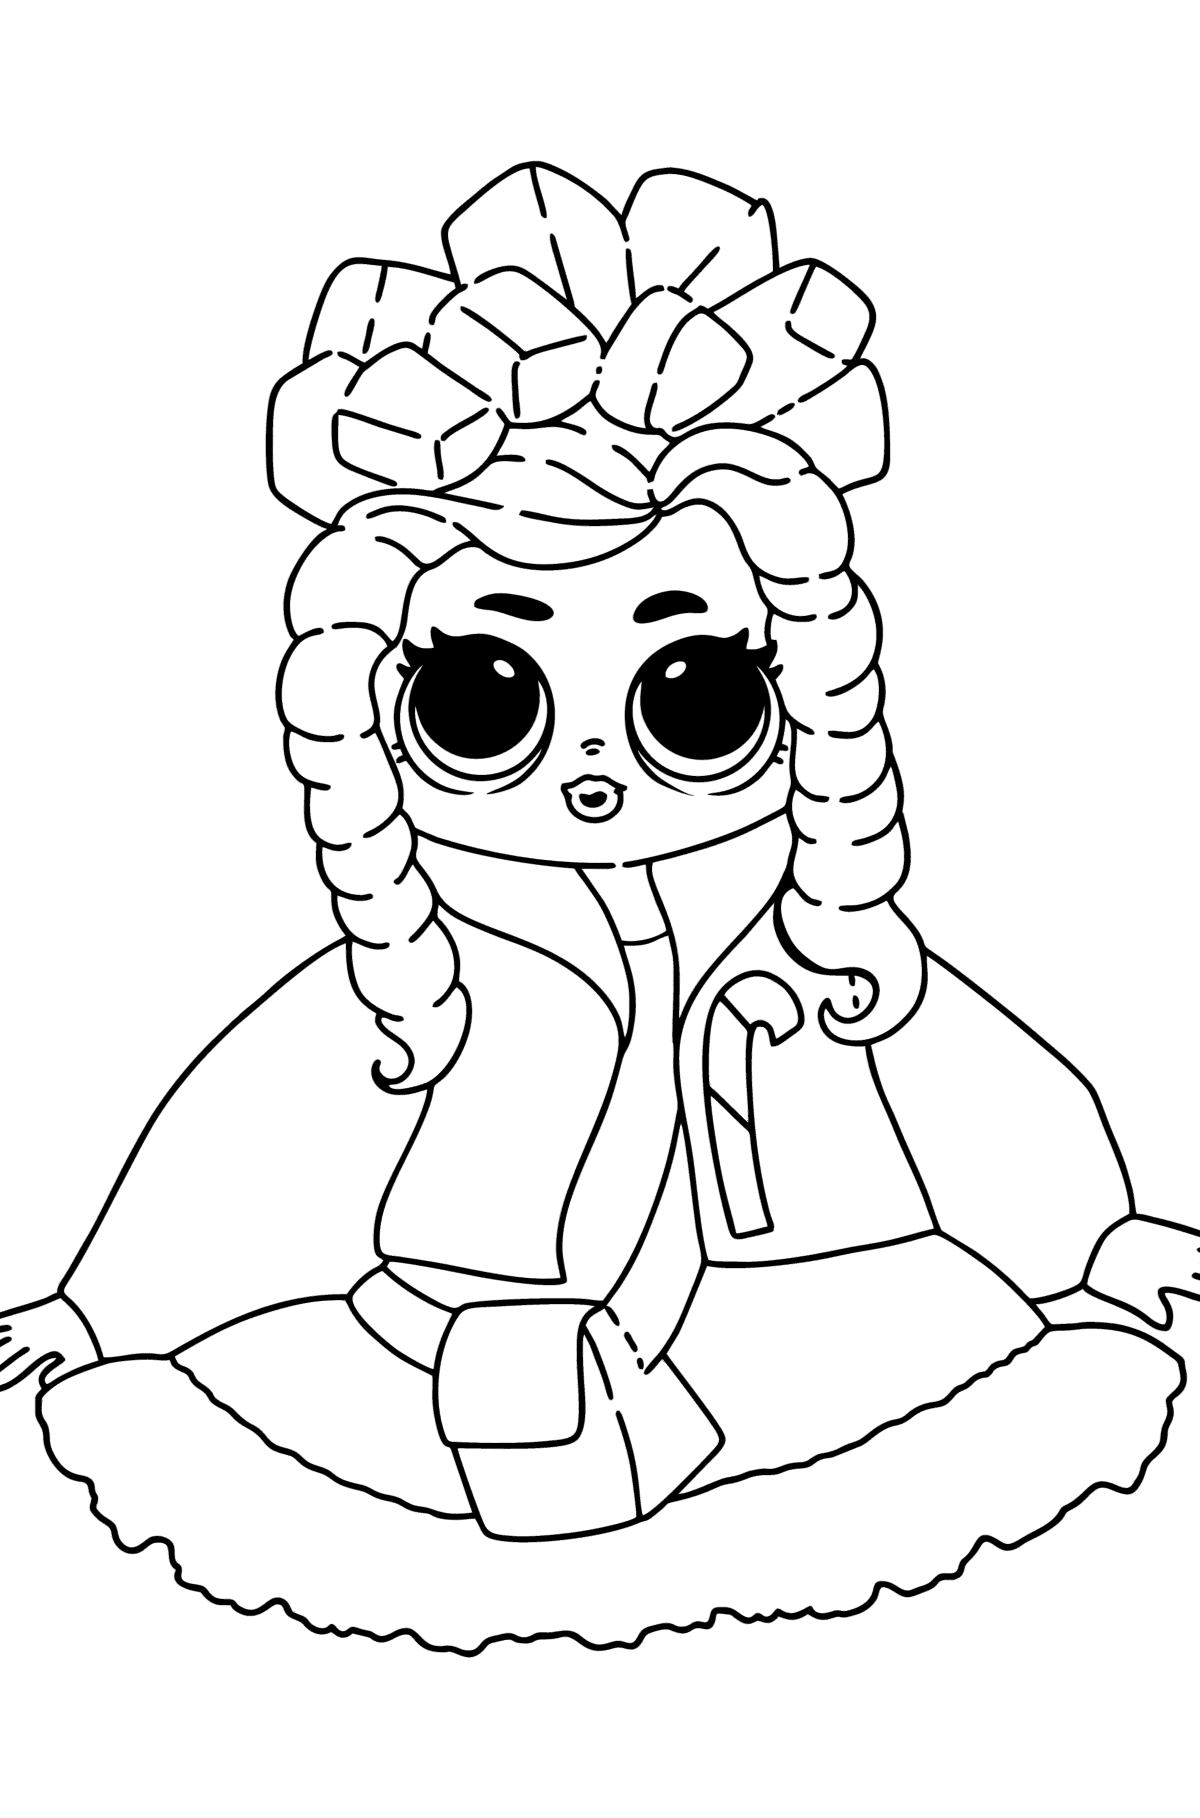 Coloring page LOL OMG Doll Sweets - Coloring Pages for Kids